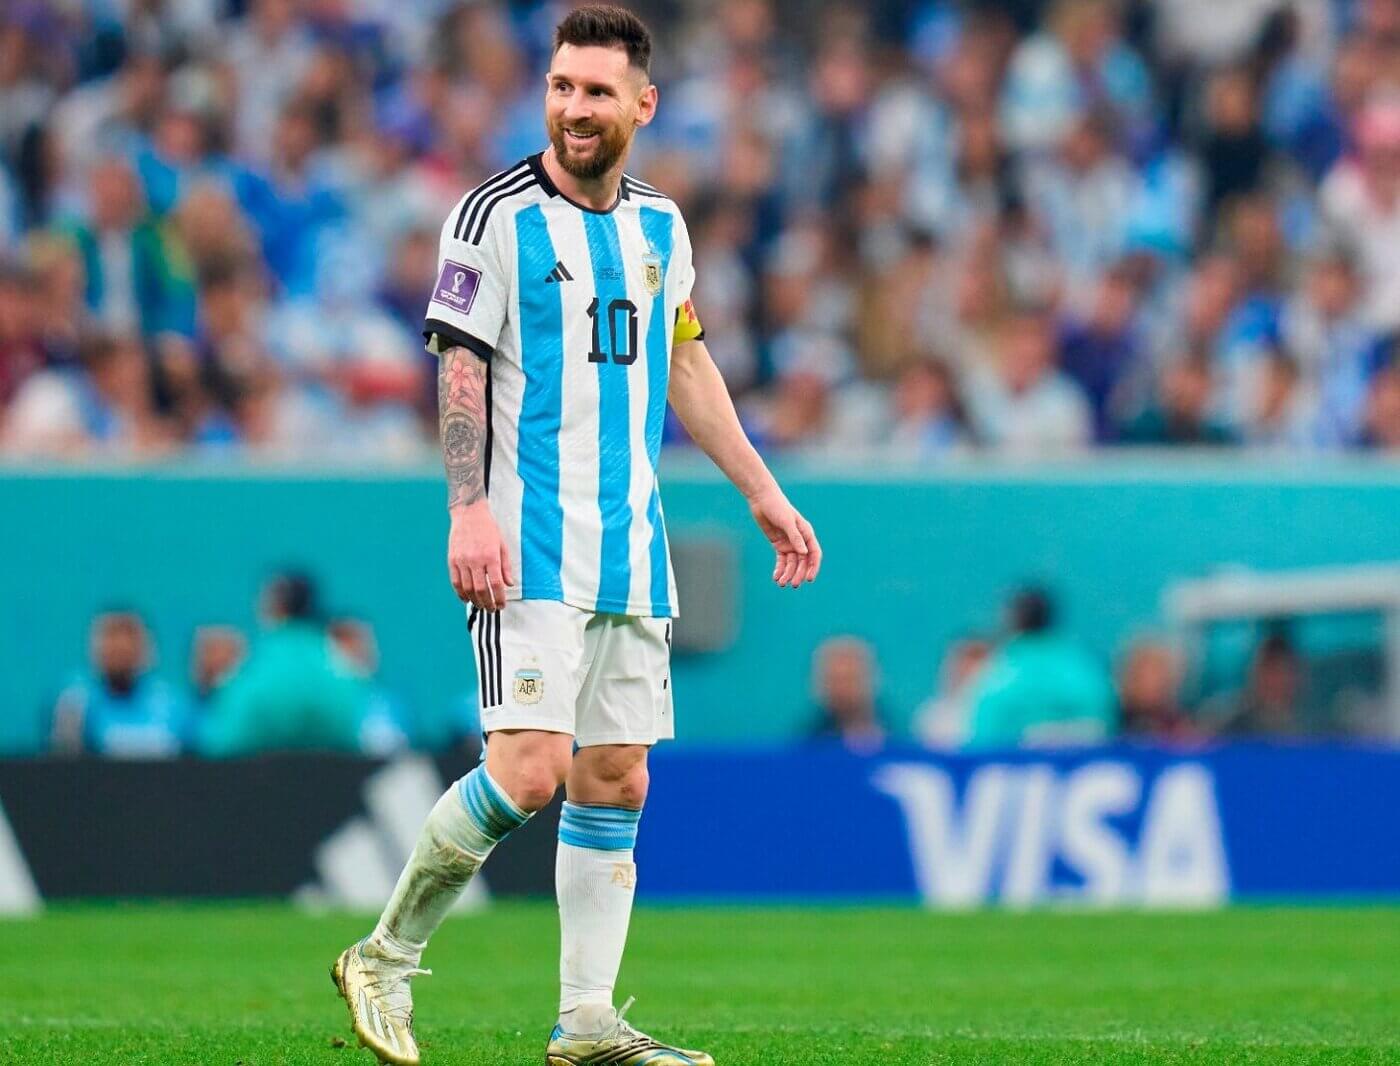 THE BEST 10 LIONEL MESSI WALLPAPER HD ARGENTINA PHOTOS IN 2023 ...